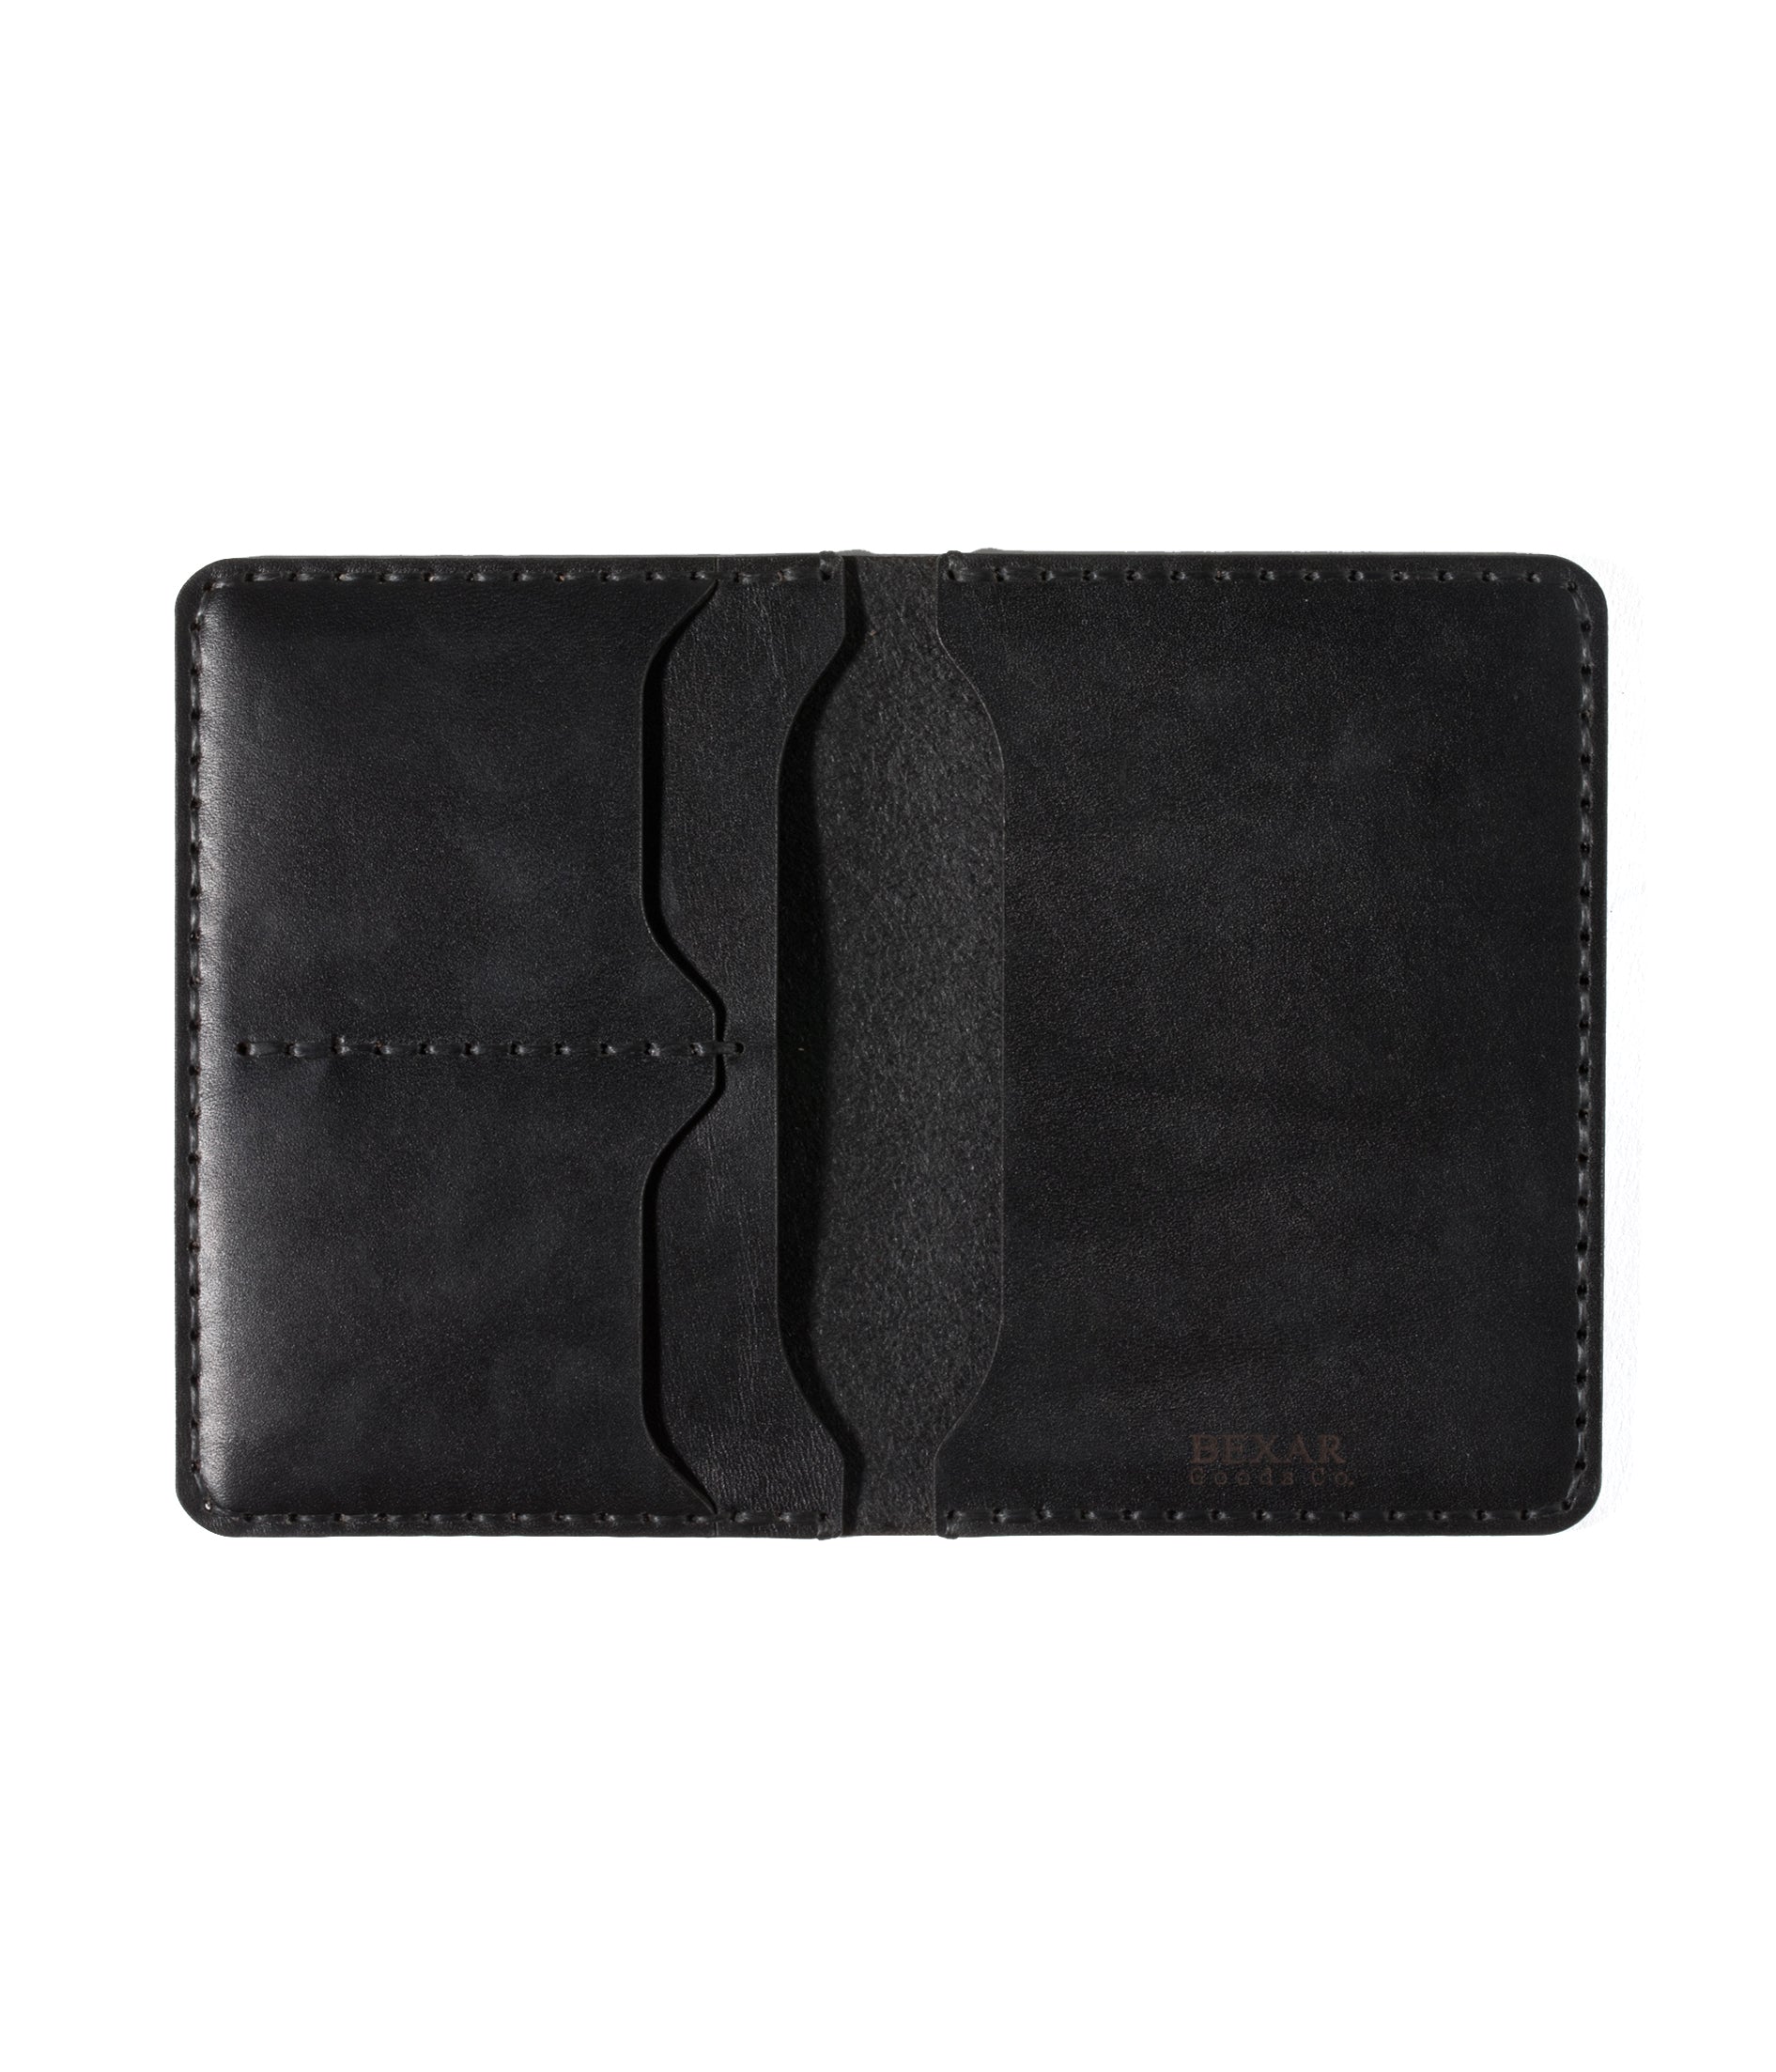 black leather passport wallet with two card pockets